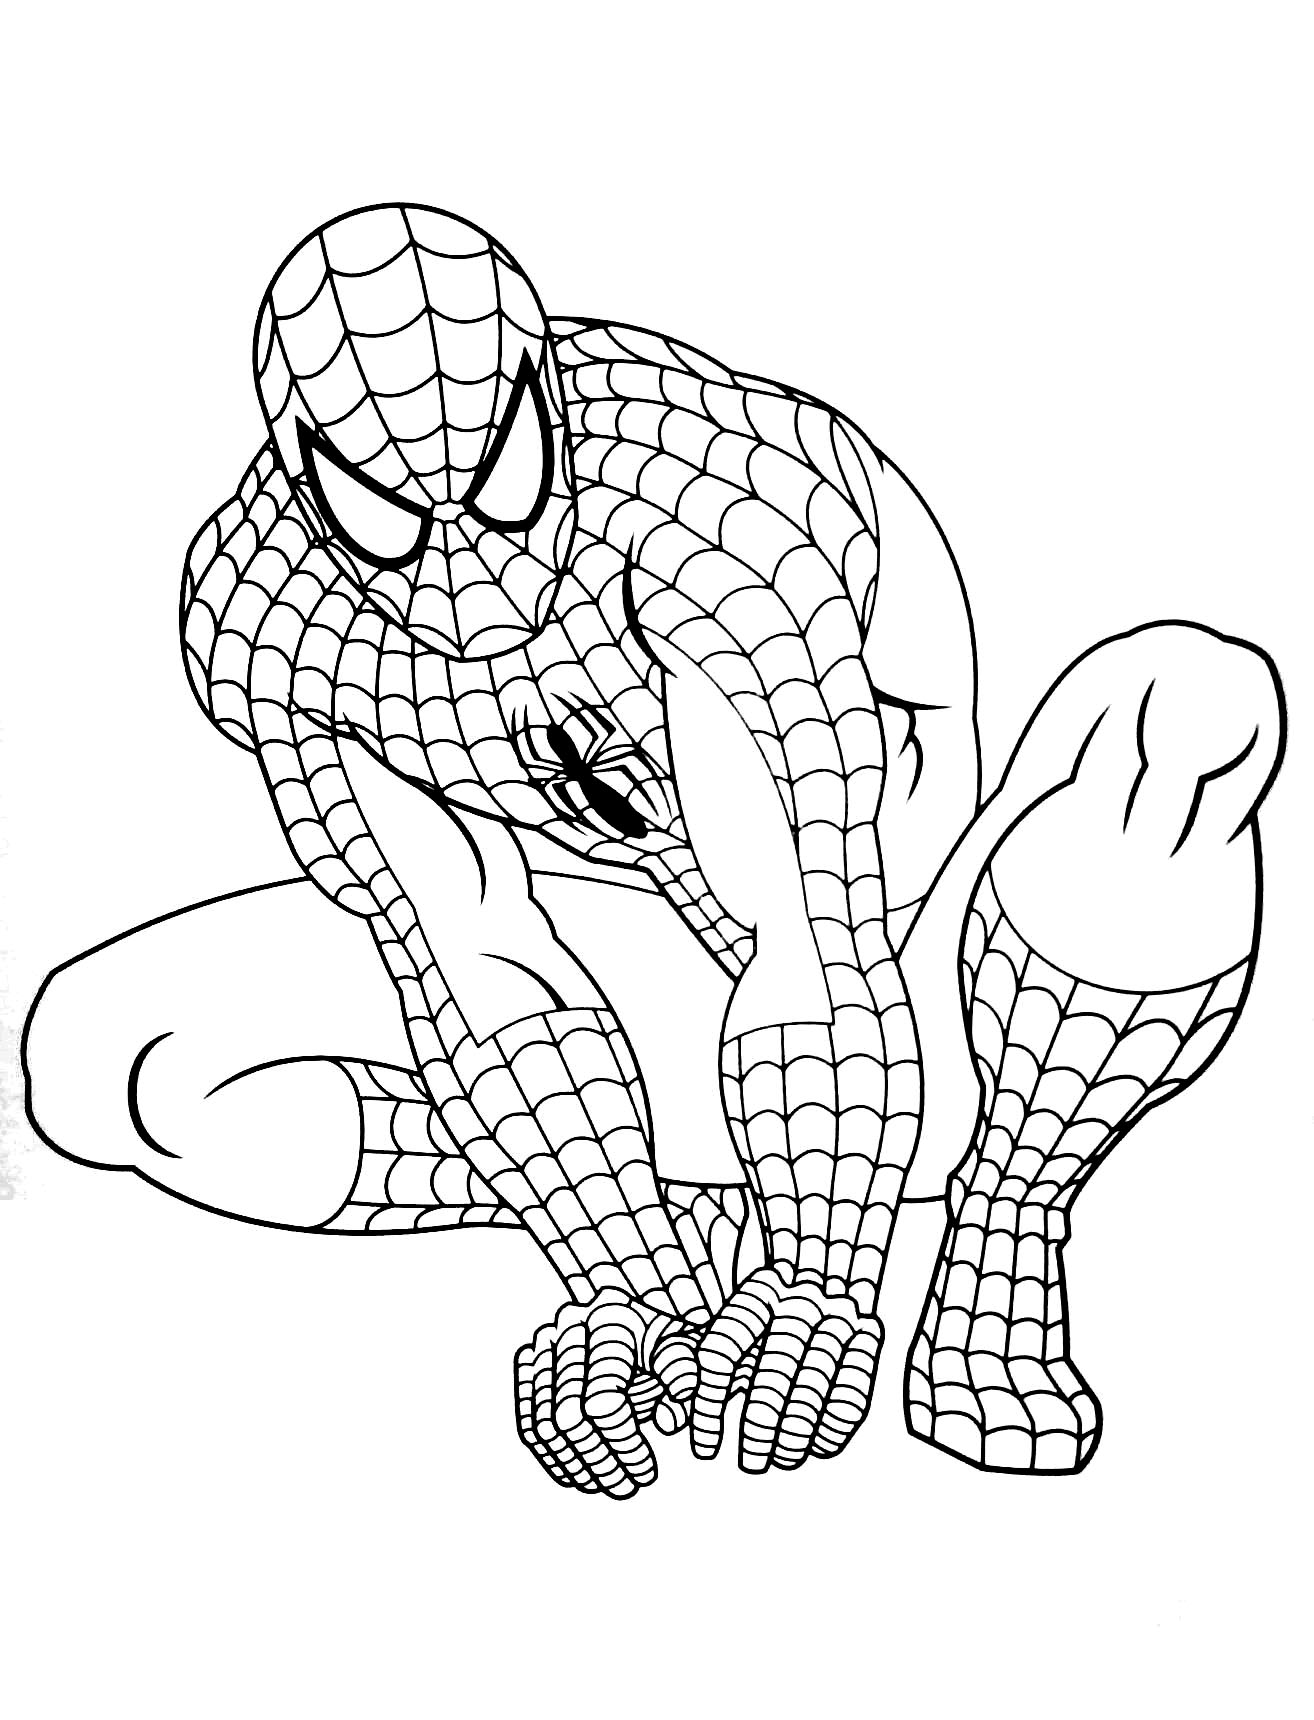 Simple Spiderman Coloring Pages For Kids